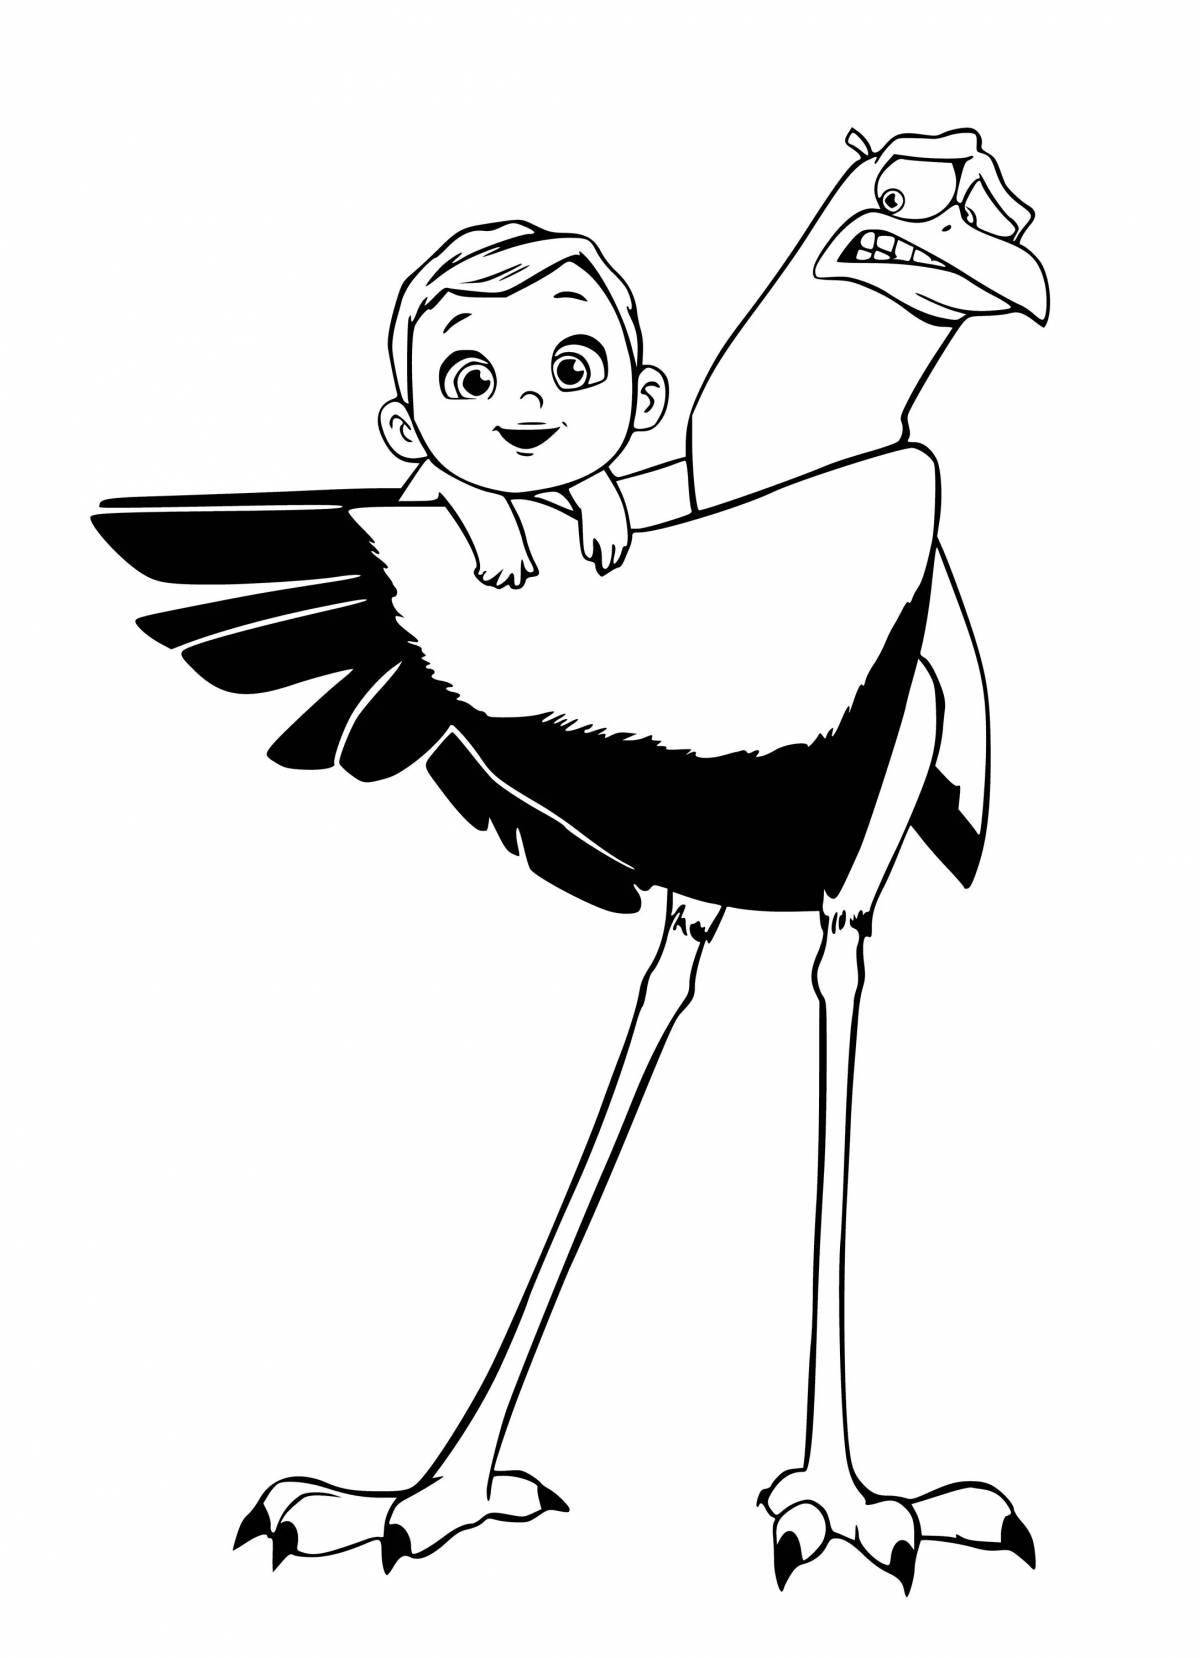 Coloring page graceful stork with a cub